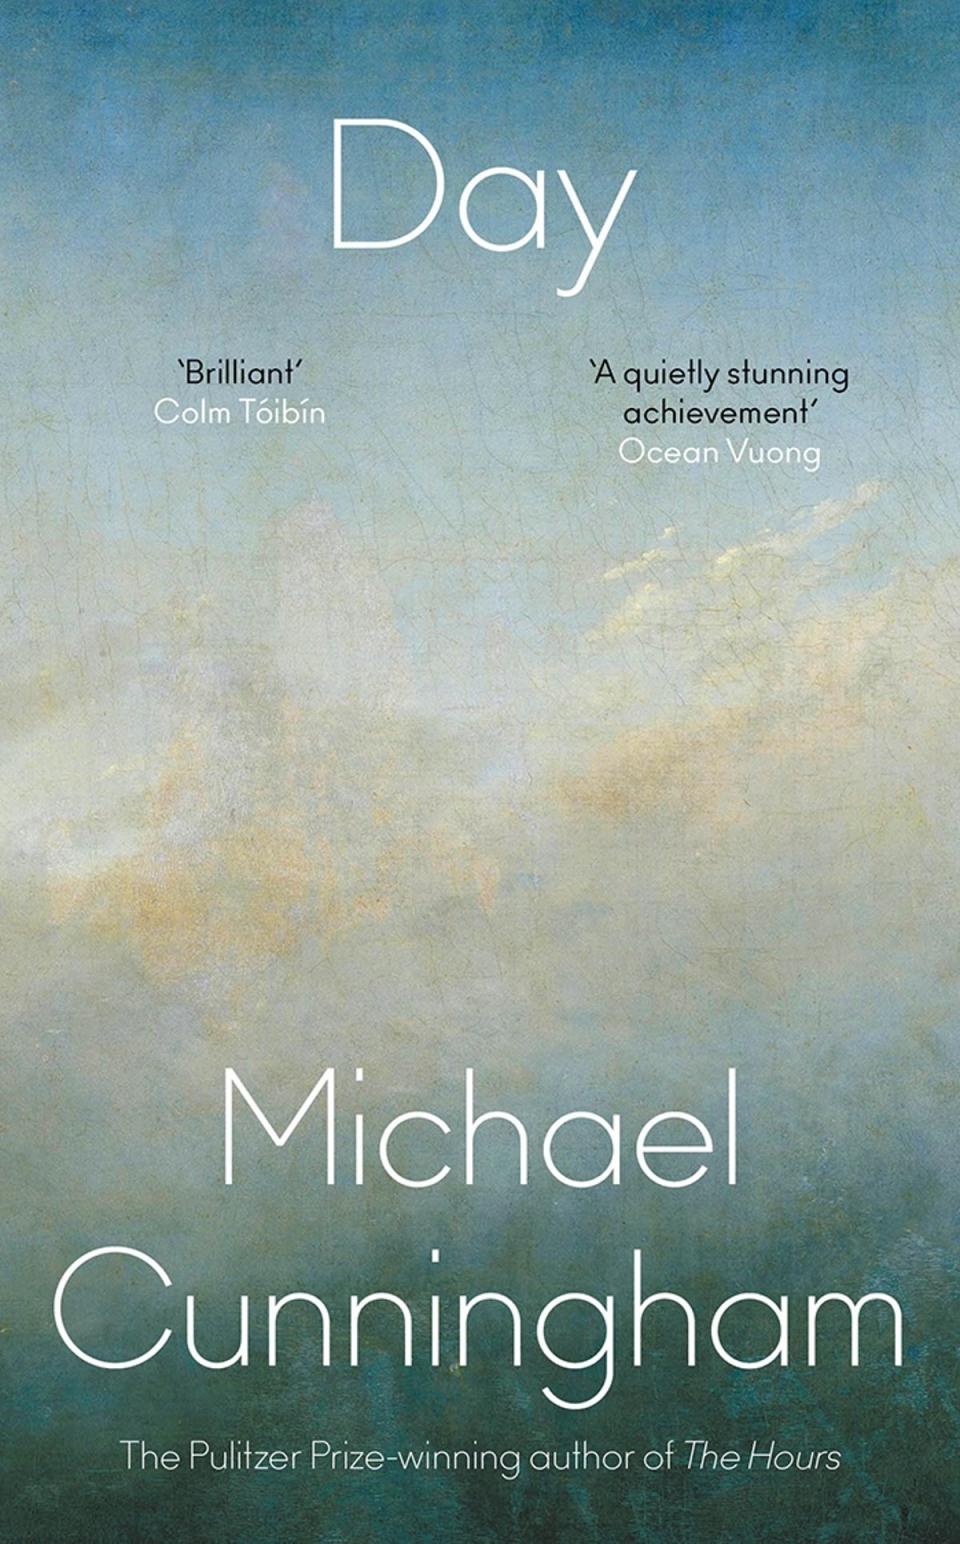 Michael Cunningham’s novel ‘Day’ is about the battle to remain sane in a world gone mad (source)